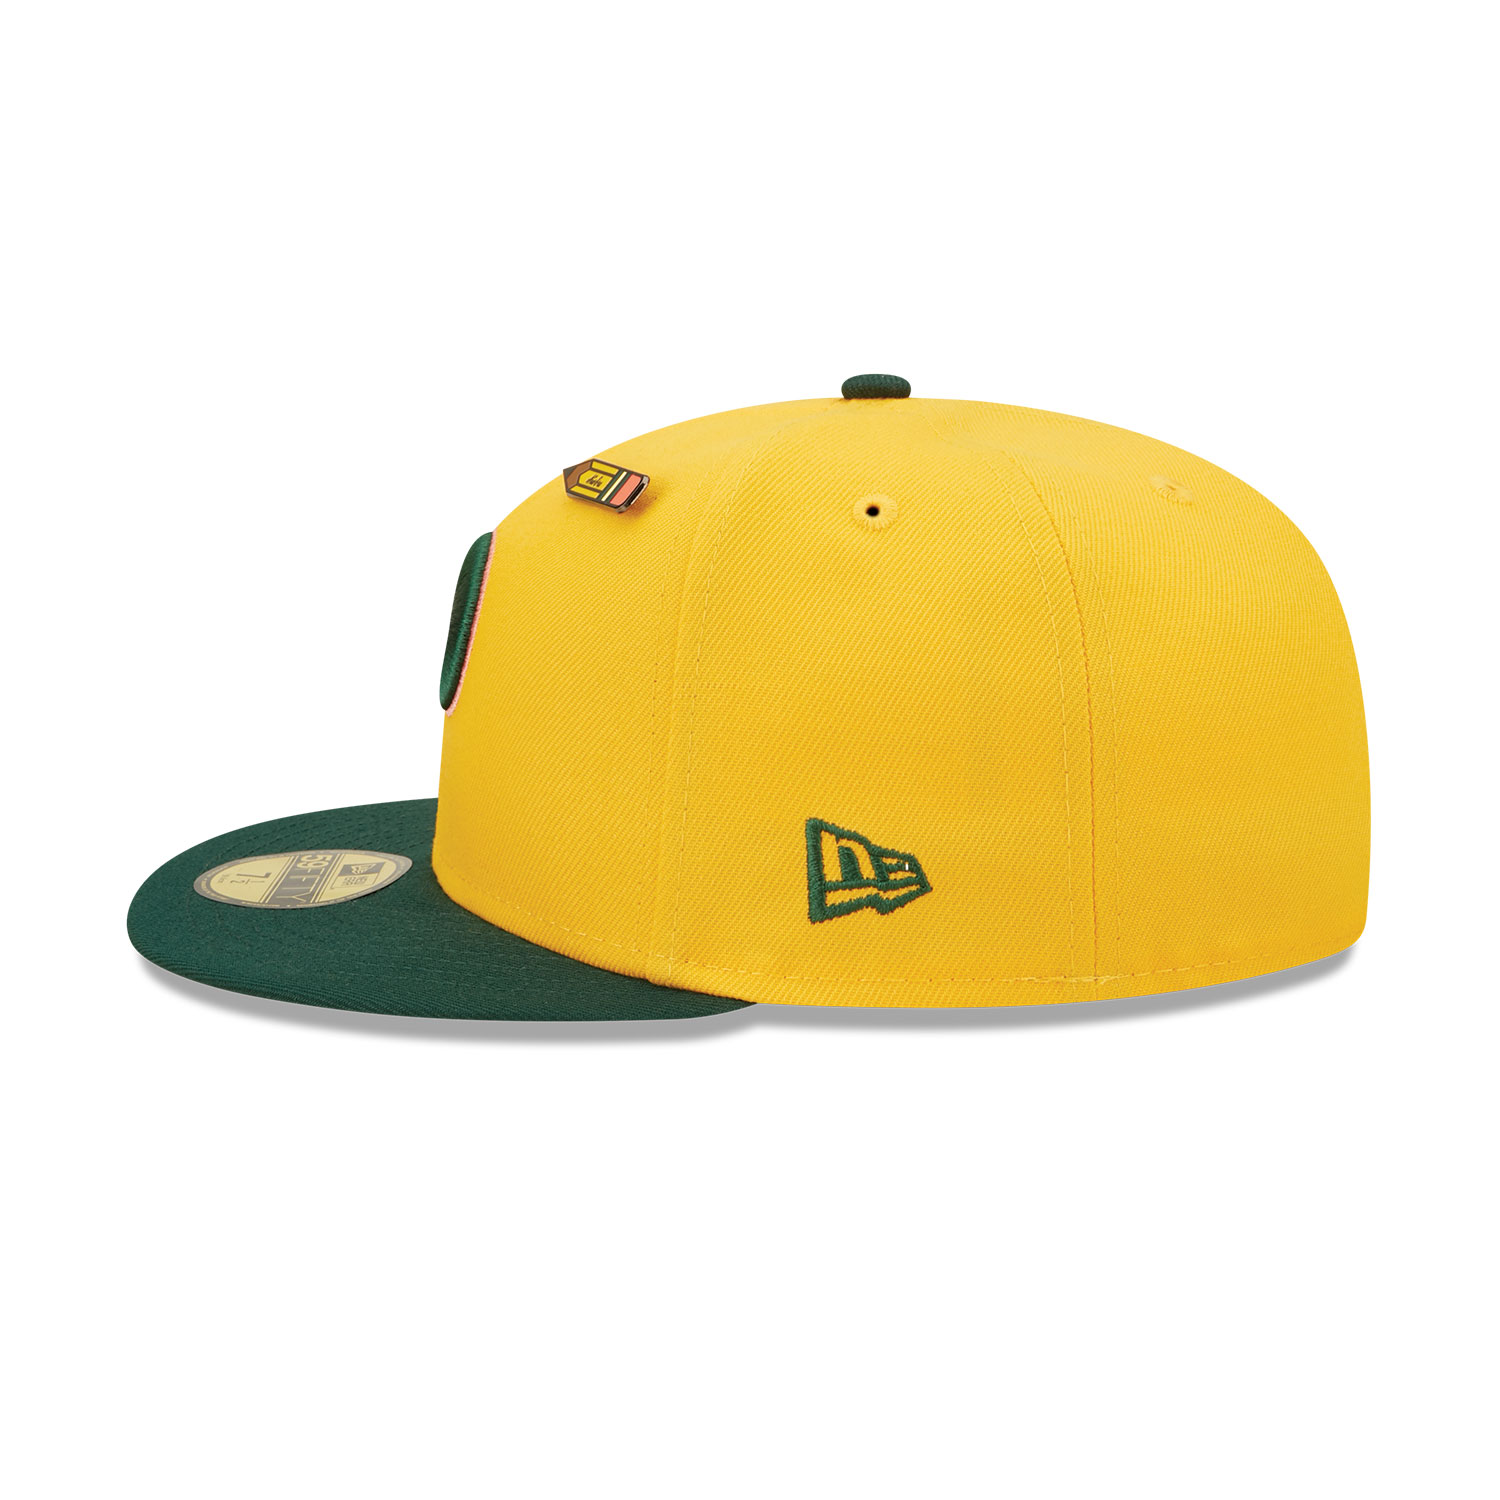 Philadelphia Phillies Back to School Yellow 59FIFTY Fitted Cap